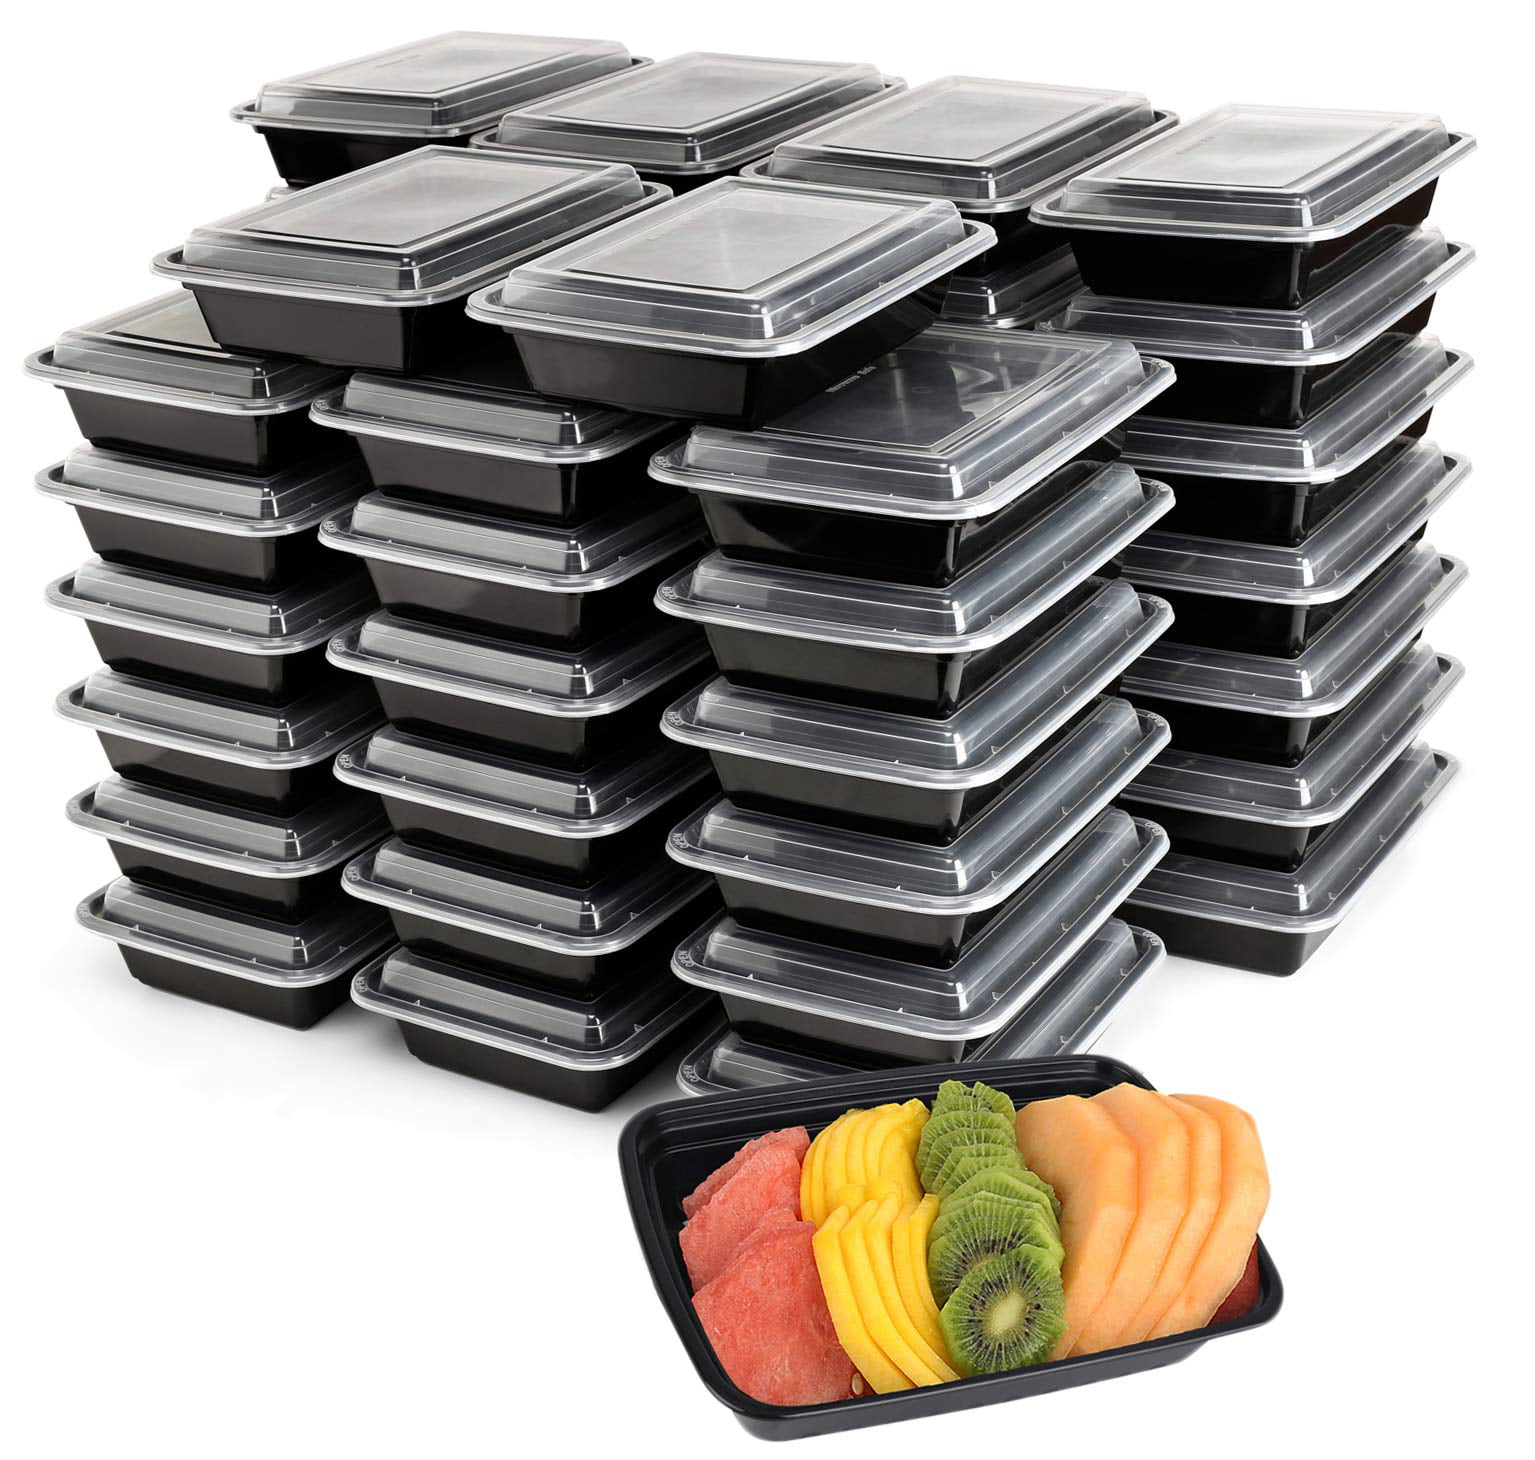 Meal Prep Food Containers Stack Microwavable BPA Free Plastic Lunch Box Lids 